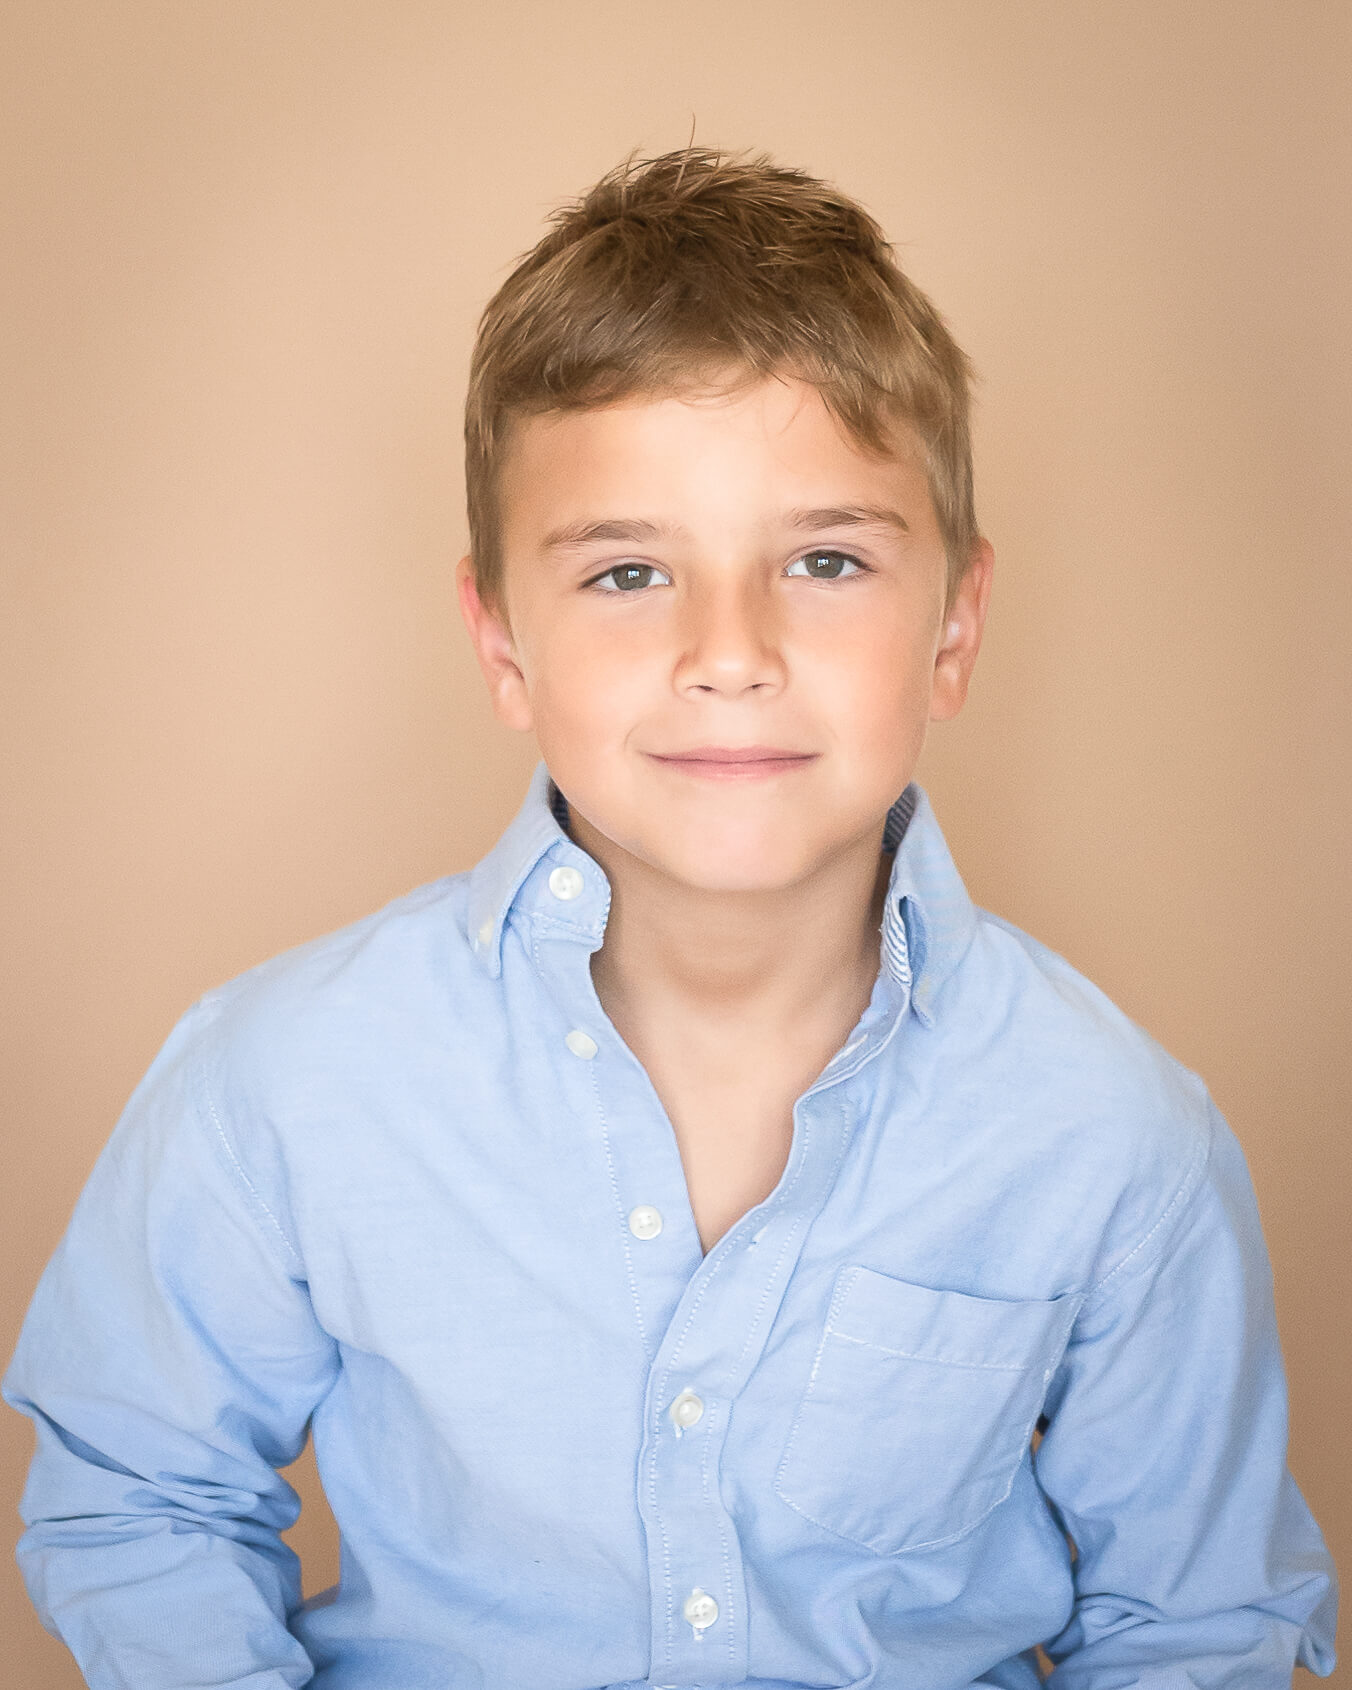 studio portrait of an 8 year old boy with a blue dress shirt on a tan background